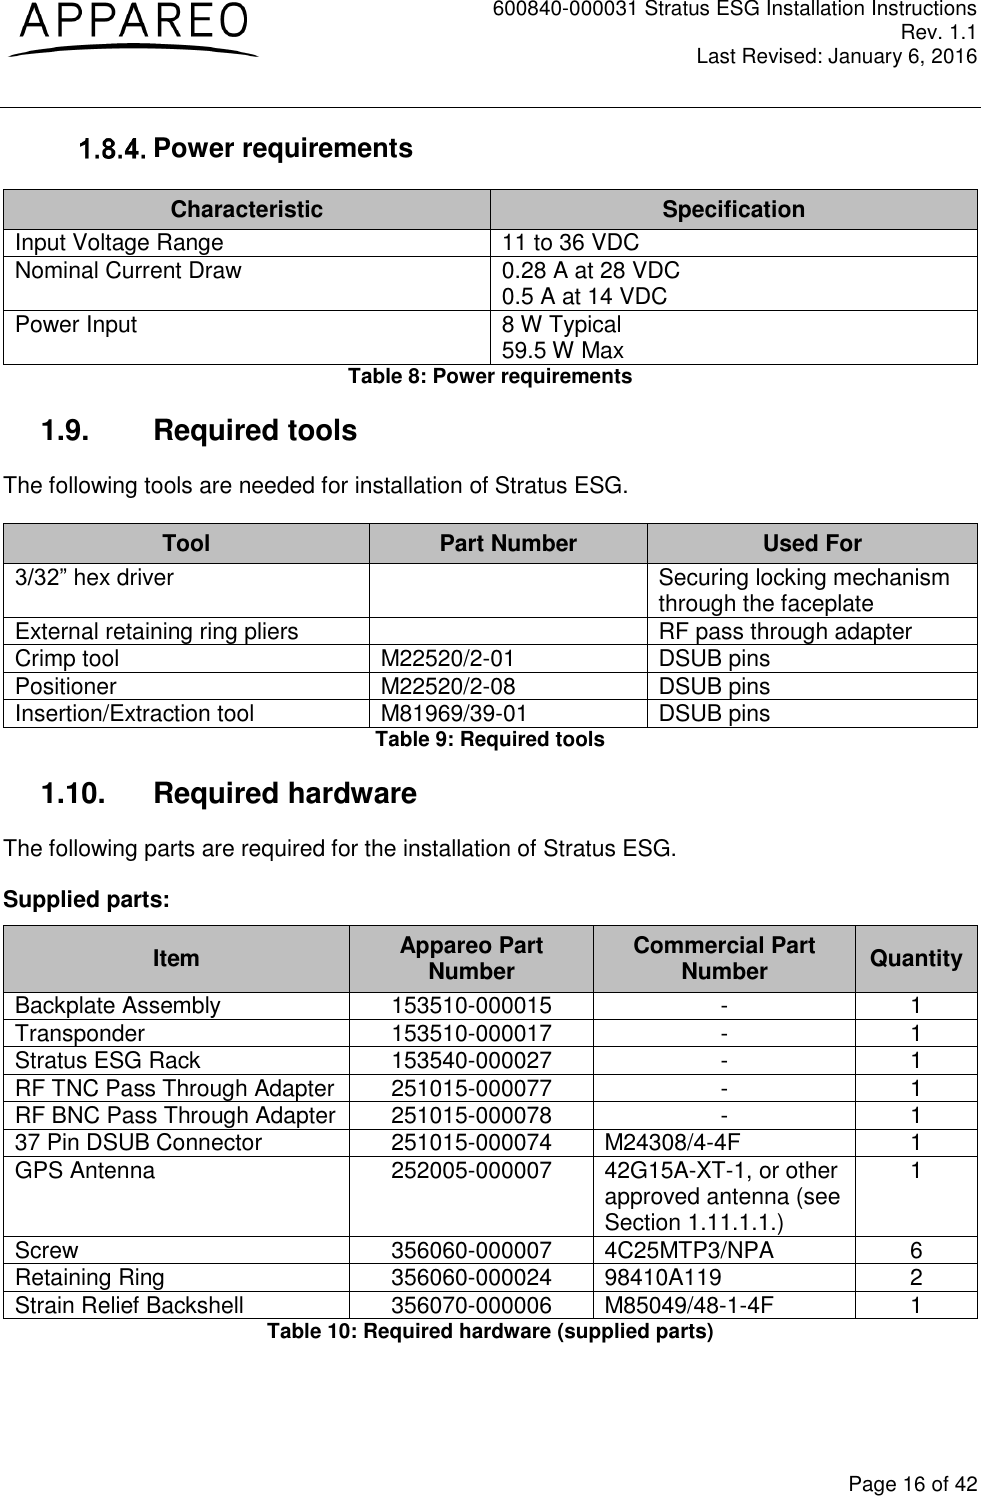 600840-000031 Stratus ESG Installation Instructions Rev. 1.1 Last Revised: January 6, 2016  Page 16 of 42  Power requirements Characteristic Specification Input Voltage Range 11 to 36 VDC Nominal Current Draw 0.28 A at 28 VDC 0.5 A at 14 VDC Power Input 8 W Typical 59.5 W Max Table 8: Power requirements 1.9.  Required tools The following tools are needed for installation of Stratus ESG. Tool Part Number Used For 3/32” hex driver  Securing locking mechanism through the faceplate External retaining ring pliers  RF pass through adapter Crimp tool M22520/2-01 DSUB pins Positioner M22520/2-08 DSUB pins Insertion/Extraction tool M81969/39-01 DSUB pins Table 9: Required tools 1.10.  Required hardware The following parts are required for the installation of Stratus ESG.  Supplied parts: Item Appareo Part Number Commercial Part Number Quantity Backplate Assembly 153510-000015 - 1 Transponder 153510-000017 - 1 Stratus ESG Rack 153540-000027 - 1 RF TNC Pass Through Adapter 251015-000077 - 1 RF BNC Pass Through Adapter 251015-000078 - 1 37 Pin DSUB Connector 251015-000074 M24308/4-4F 1 GPS Antenna 252005-000007 42G15A-XT-1, or other approved antenna (see Section 1.11.1.1.) 1 Screw 356060-000007 4C25MTP3/NPA 6 Retaining Ring 356060-000024 98410A119 2 Strain Relief Backshell 356070-000006 M85049/48-1-4F 1 Table 10: Required hardware (supplied parts) 